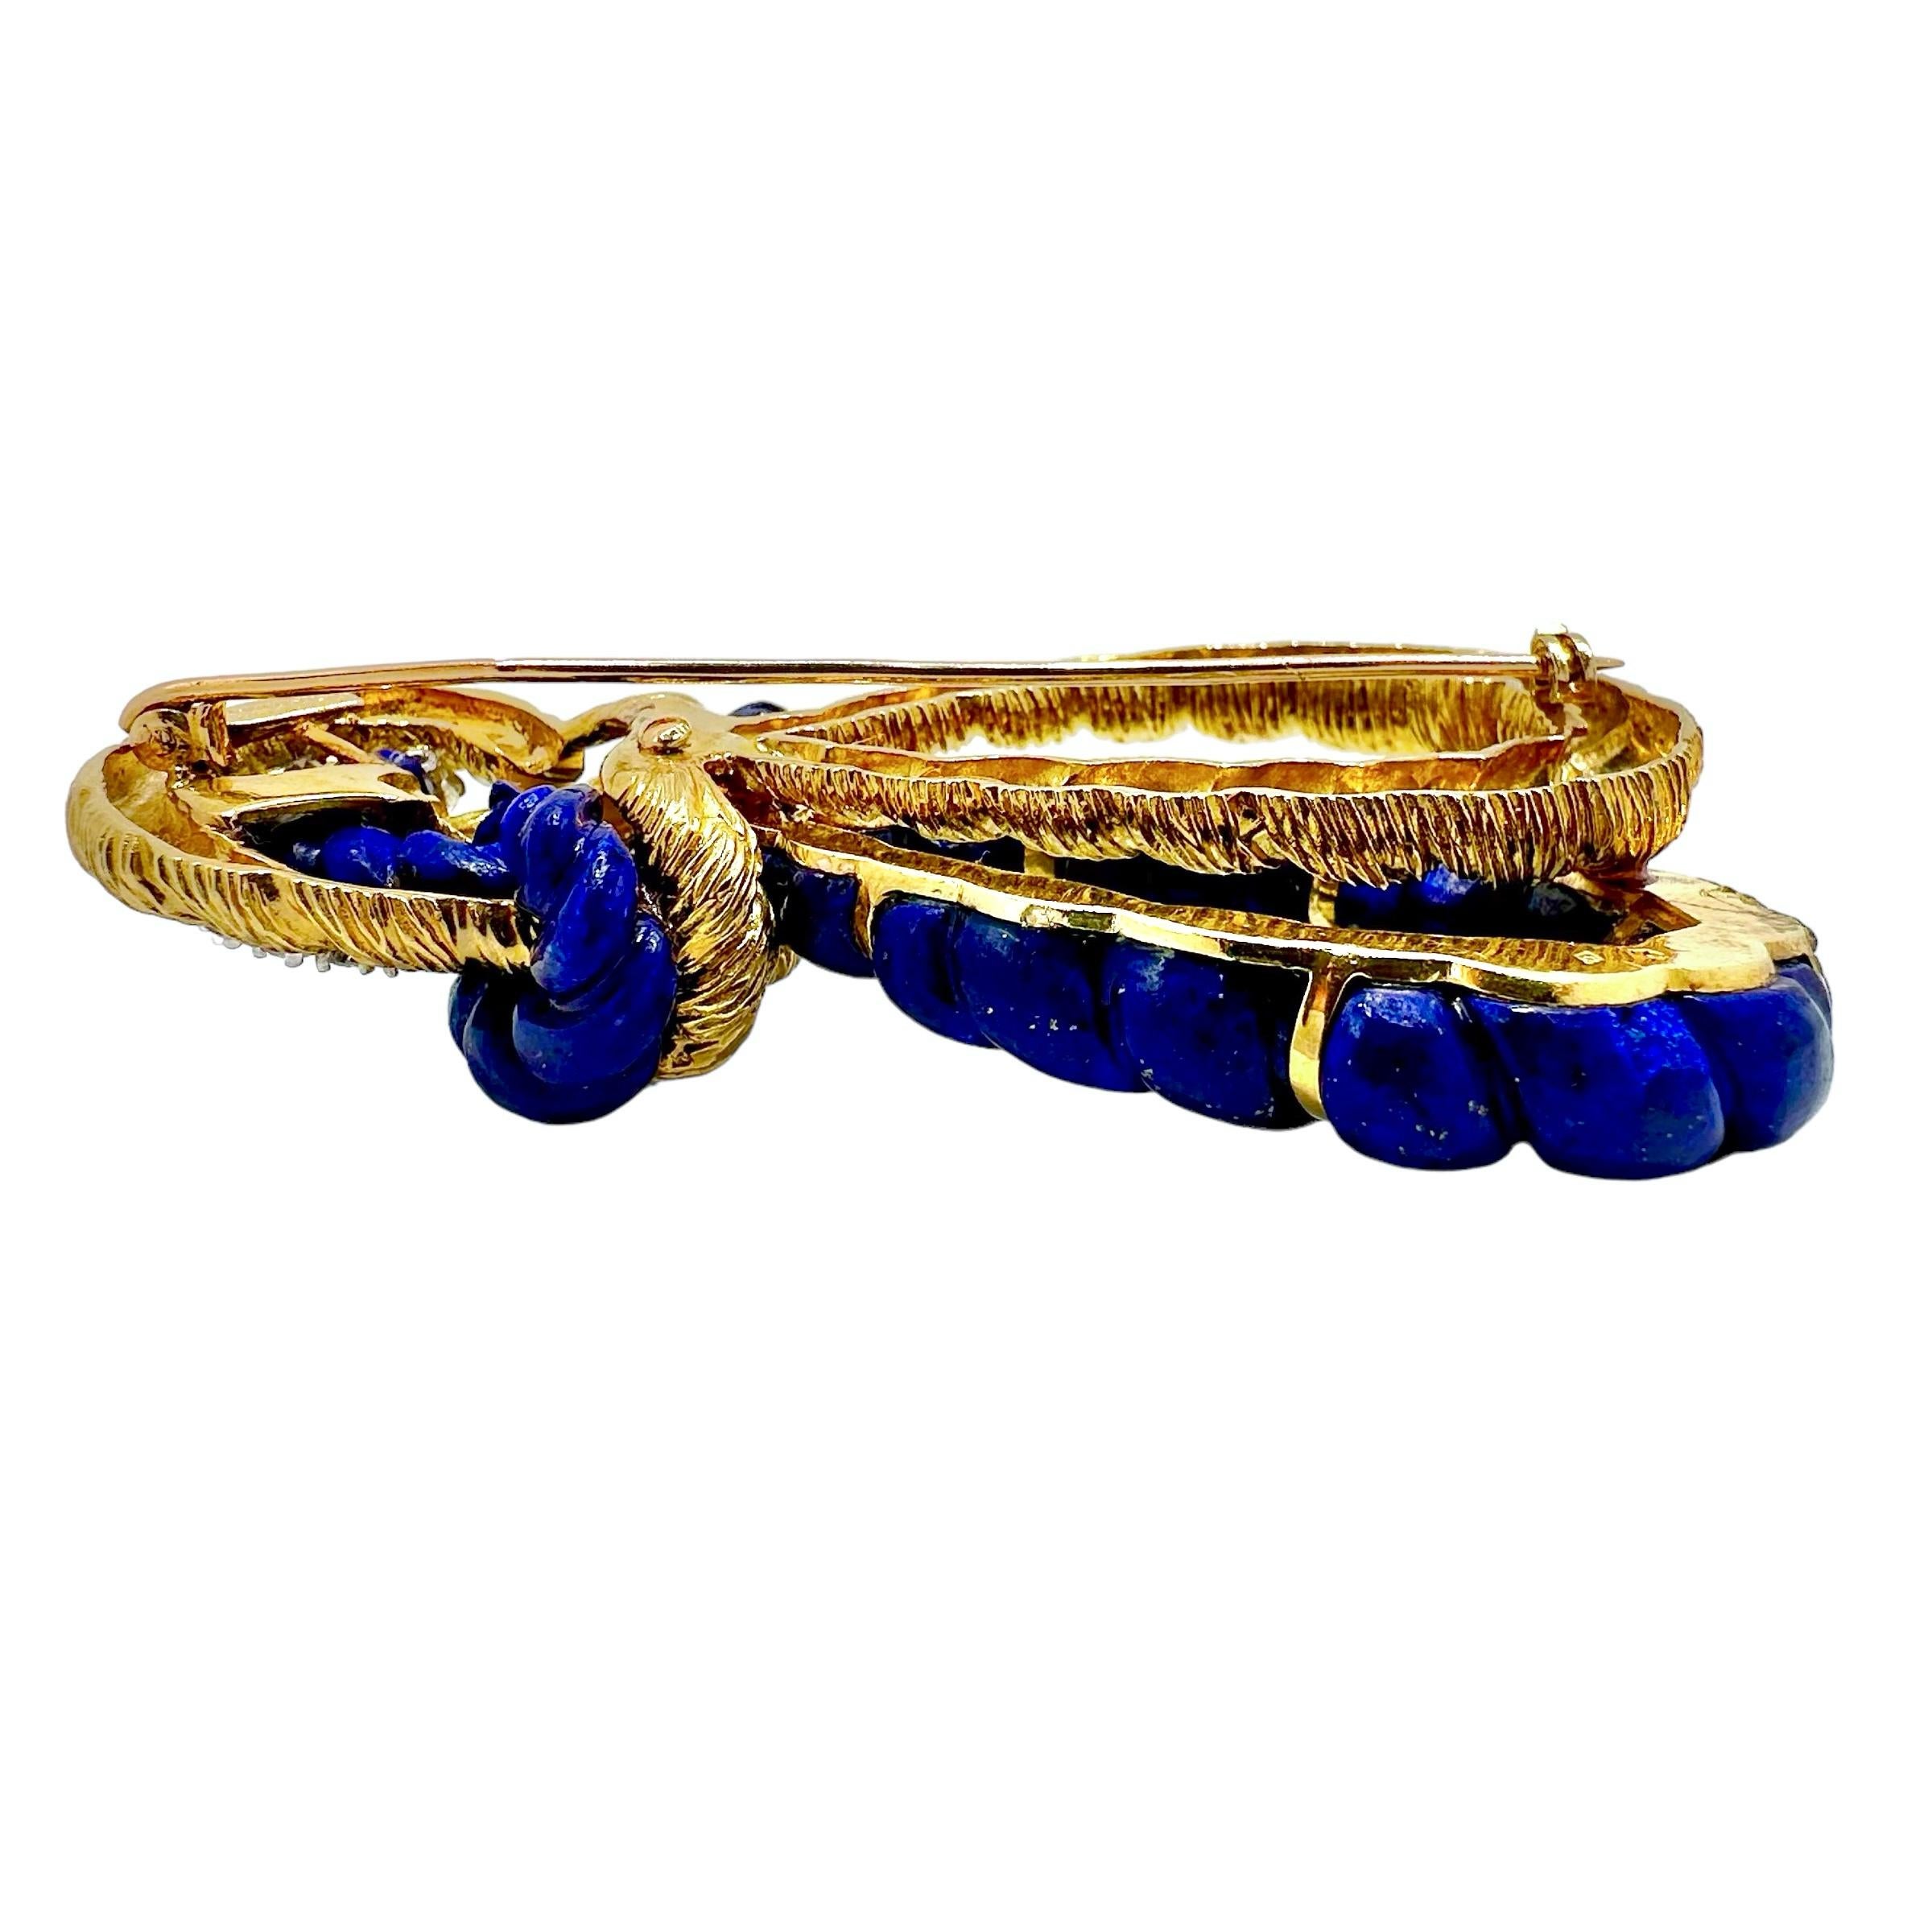 This is a large scale 18K yellow gold, bow knot brooch comprised of one strand of gold, and one strand of lapis lazuli, interwoven with brilliant cut diamonds, made by the French maker,  Wander. The texture of the twisted gold rope  design contrasts